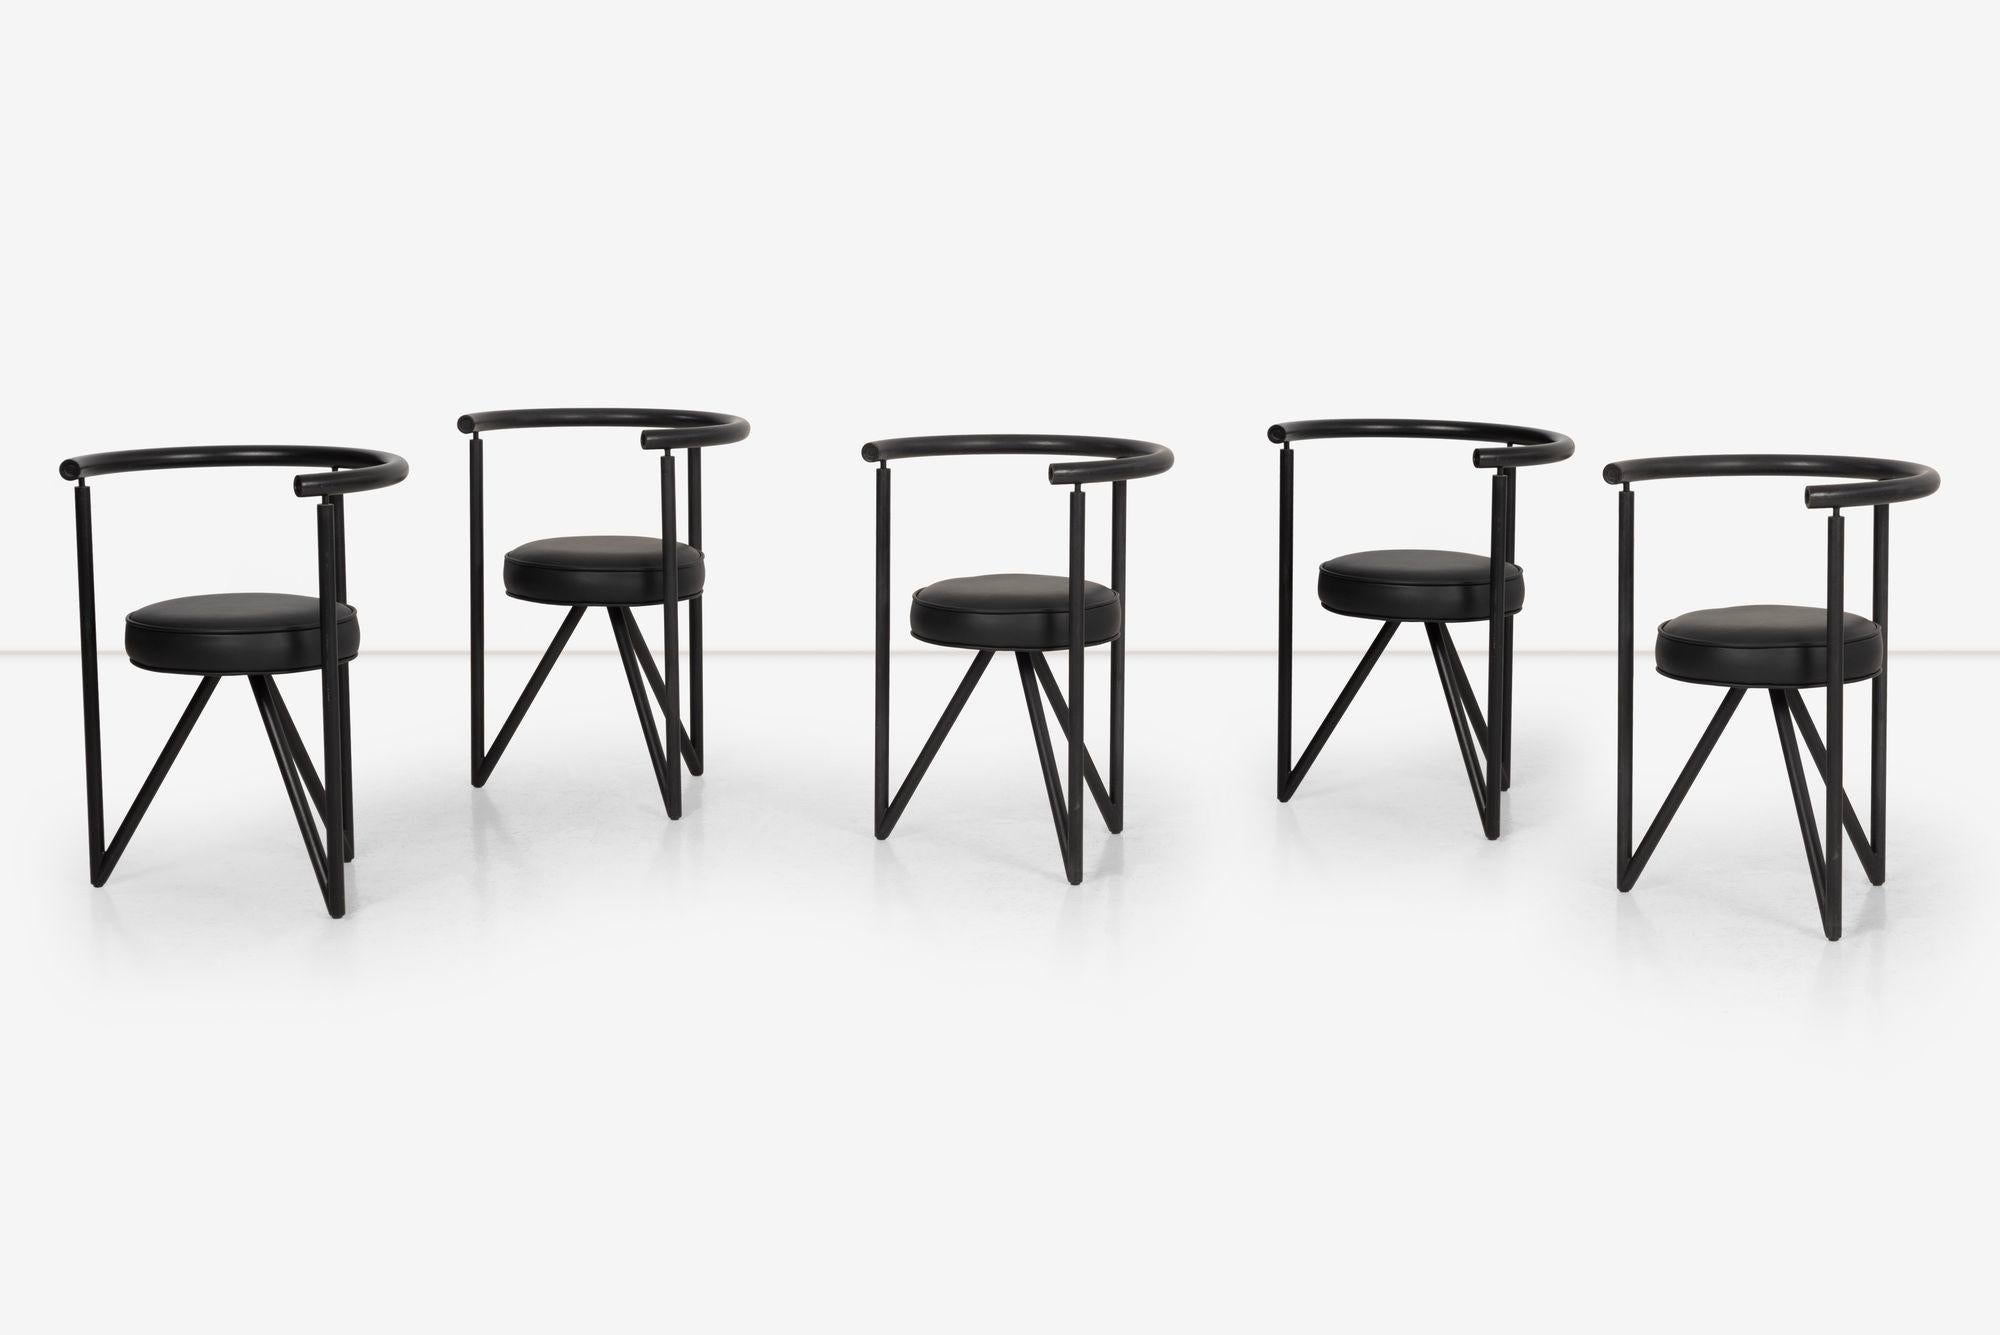 Post-Modern Philippe Starck Miss Dorn Chairs, set of Five by Disform, Spain 1982